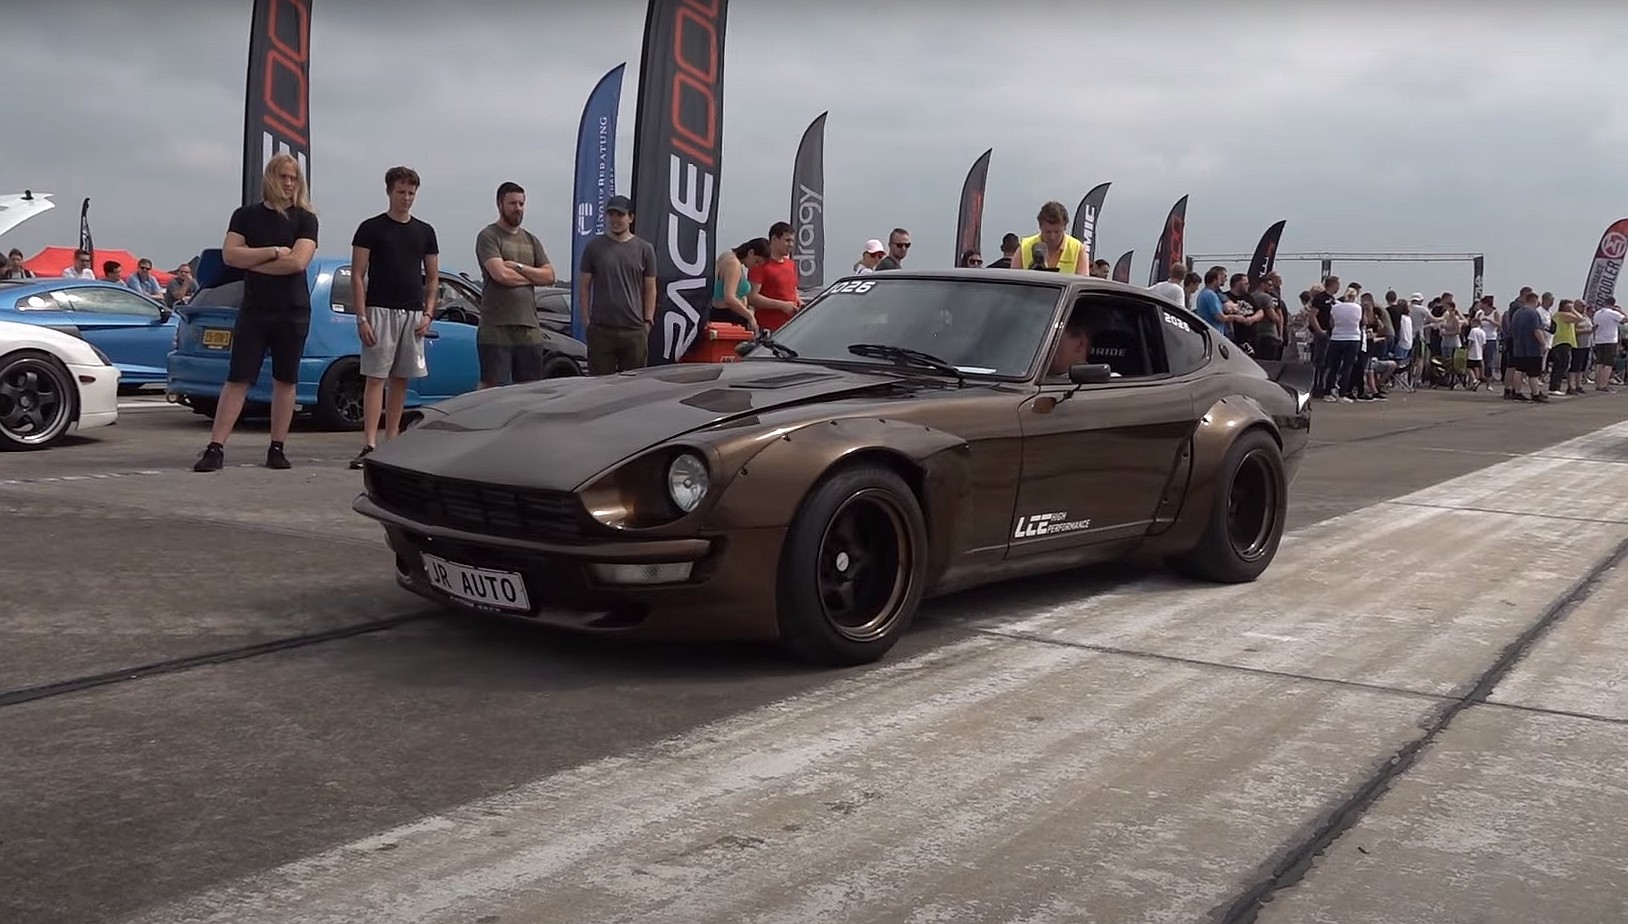 850 Hp Datsun 240z With Widebody Kit Isn T Your Average Z Car Goes Drag Racing Autoevolution